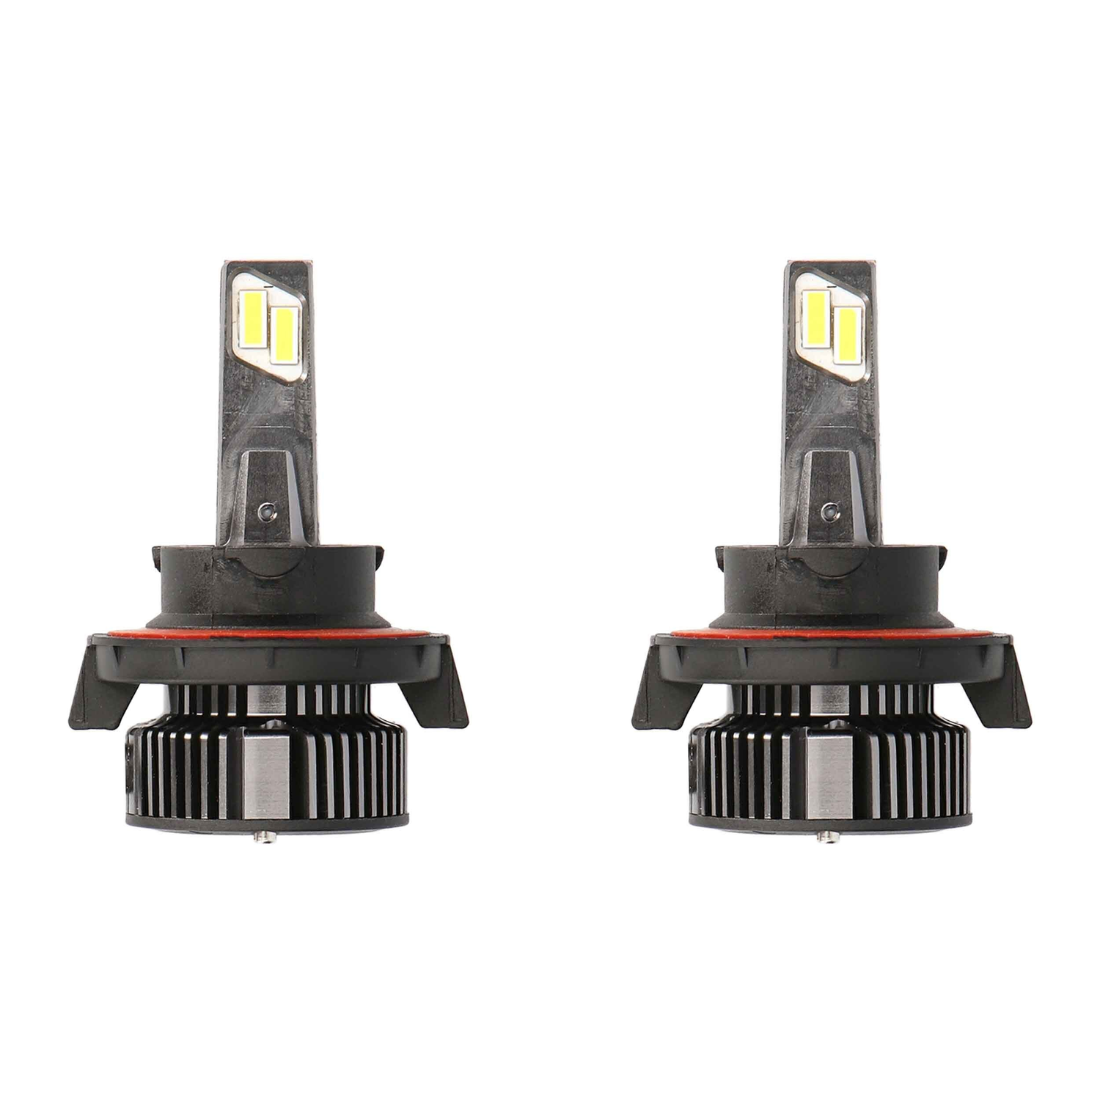 Heise HE-H13PRO H13 Pro Series Dual Beam Replacement Headlight LED Bulb Kit